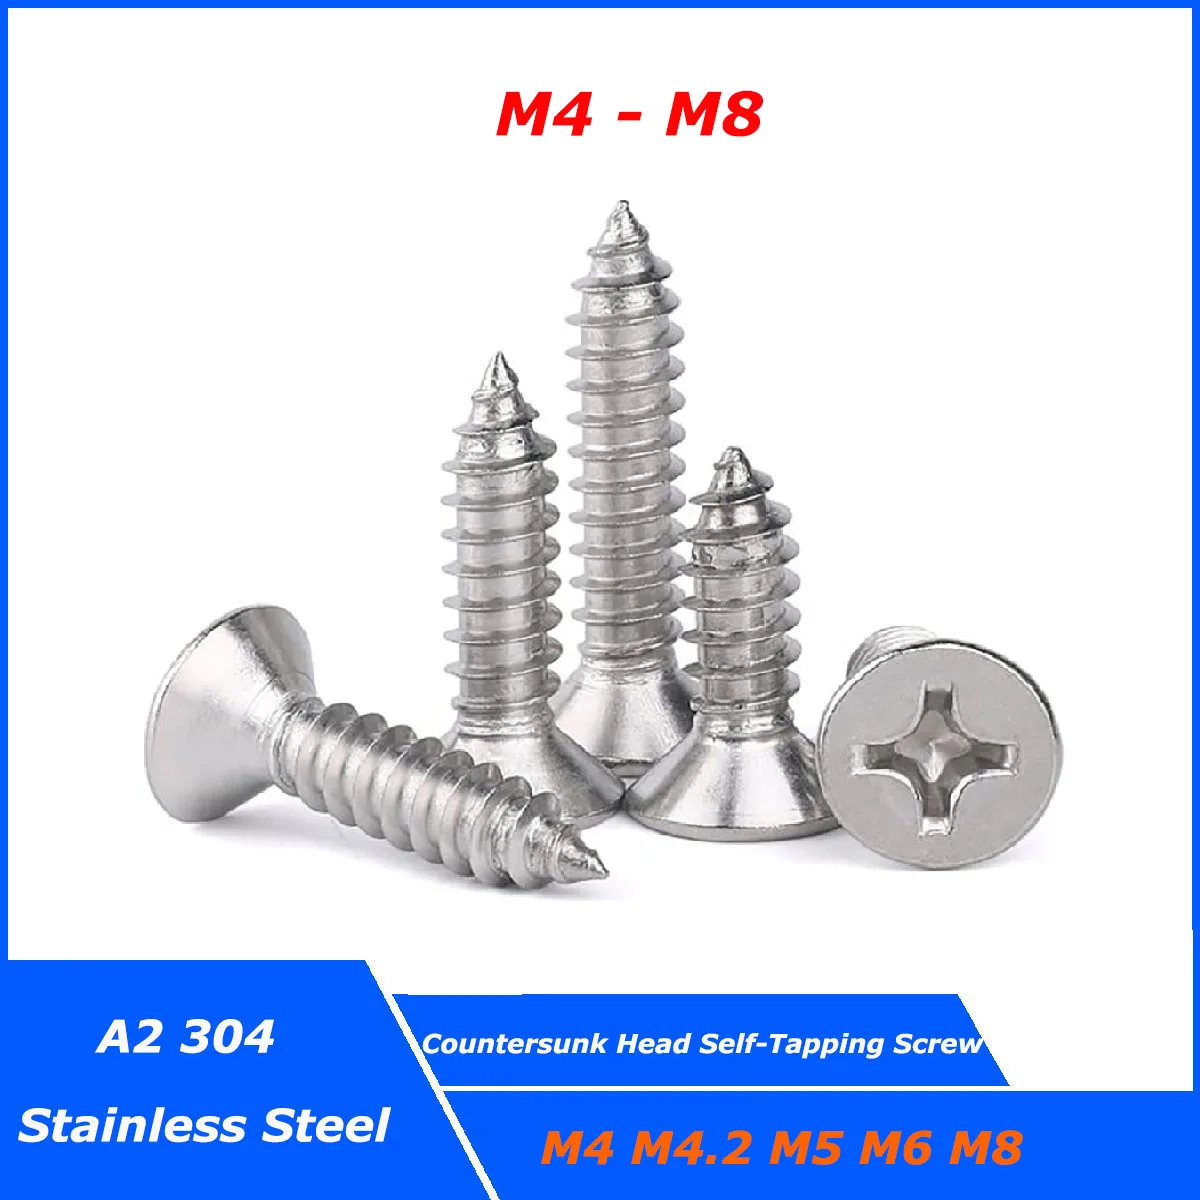 

2~10pcs A2 304 Stainless Steel Cross Phillips Flat Countersunk Head Self Tapping Screw Wood Screws M4 M4.2 M5 M6 M8